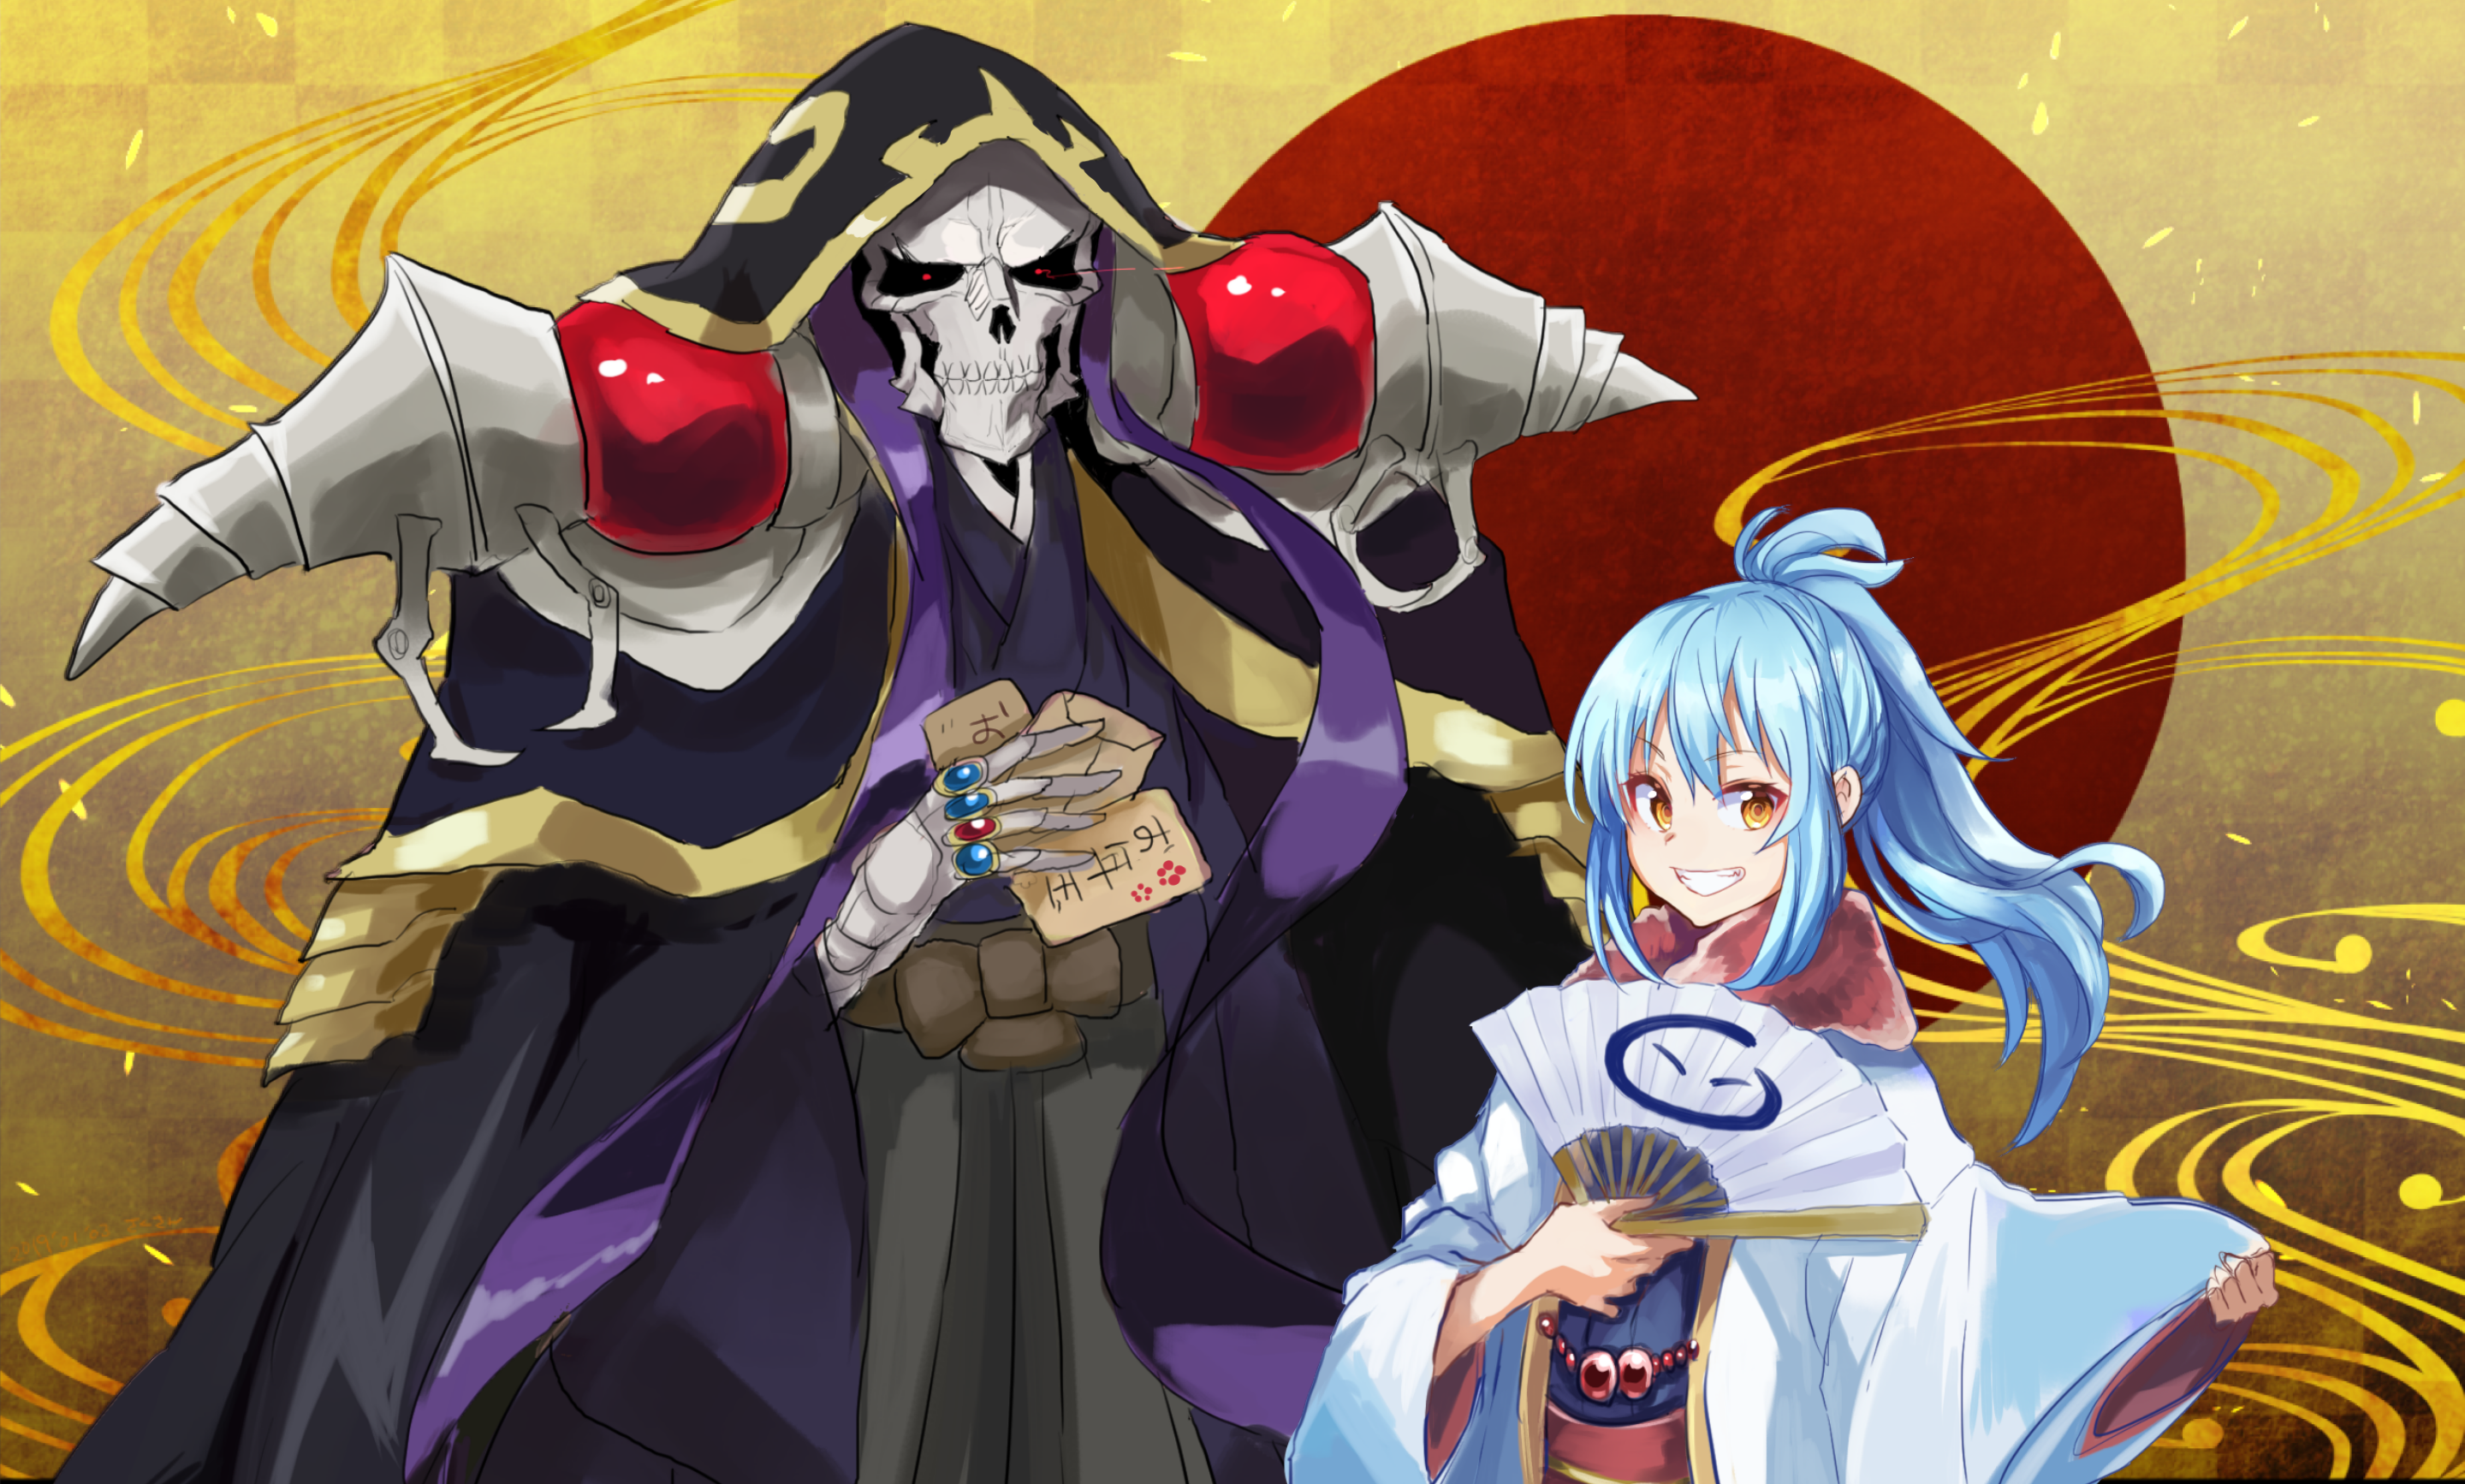 Ainz Ooal Gown Overlord Anime Rimuru Tempest That Time I Got Reincarnated As A Slime 2880x1734